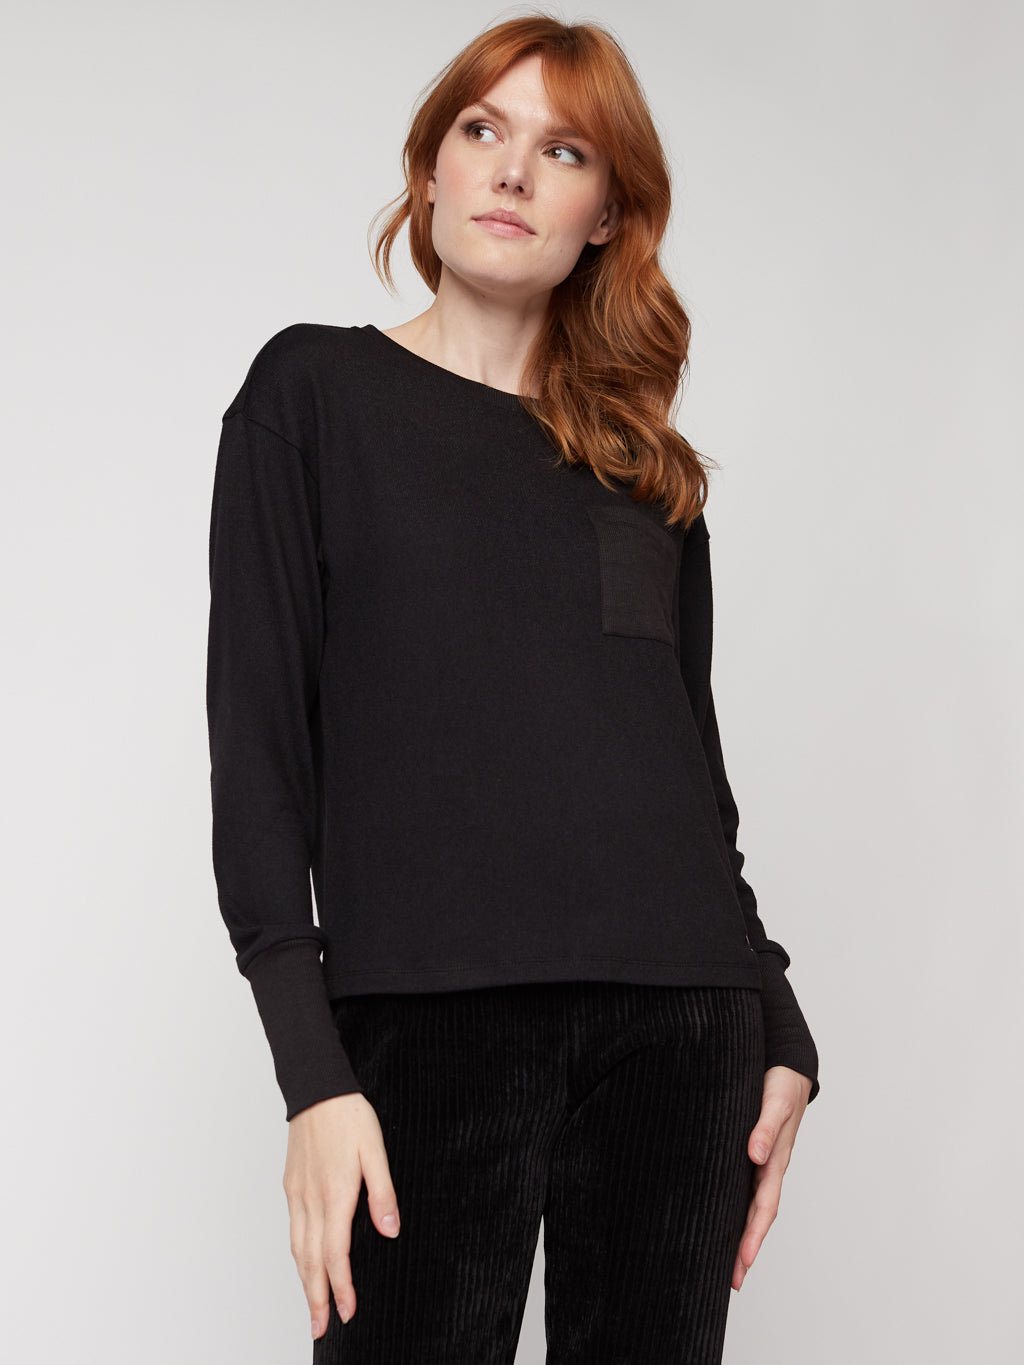 Long-sleeve semi-fitted t-shirt